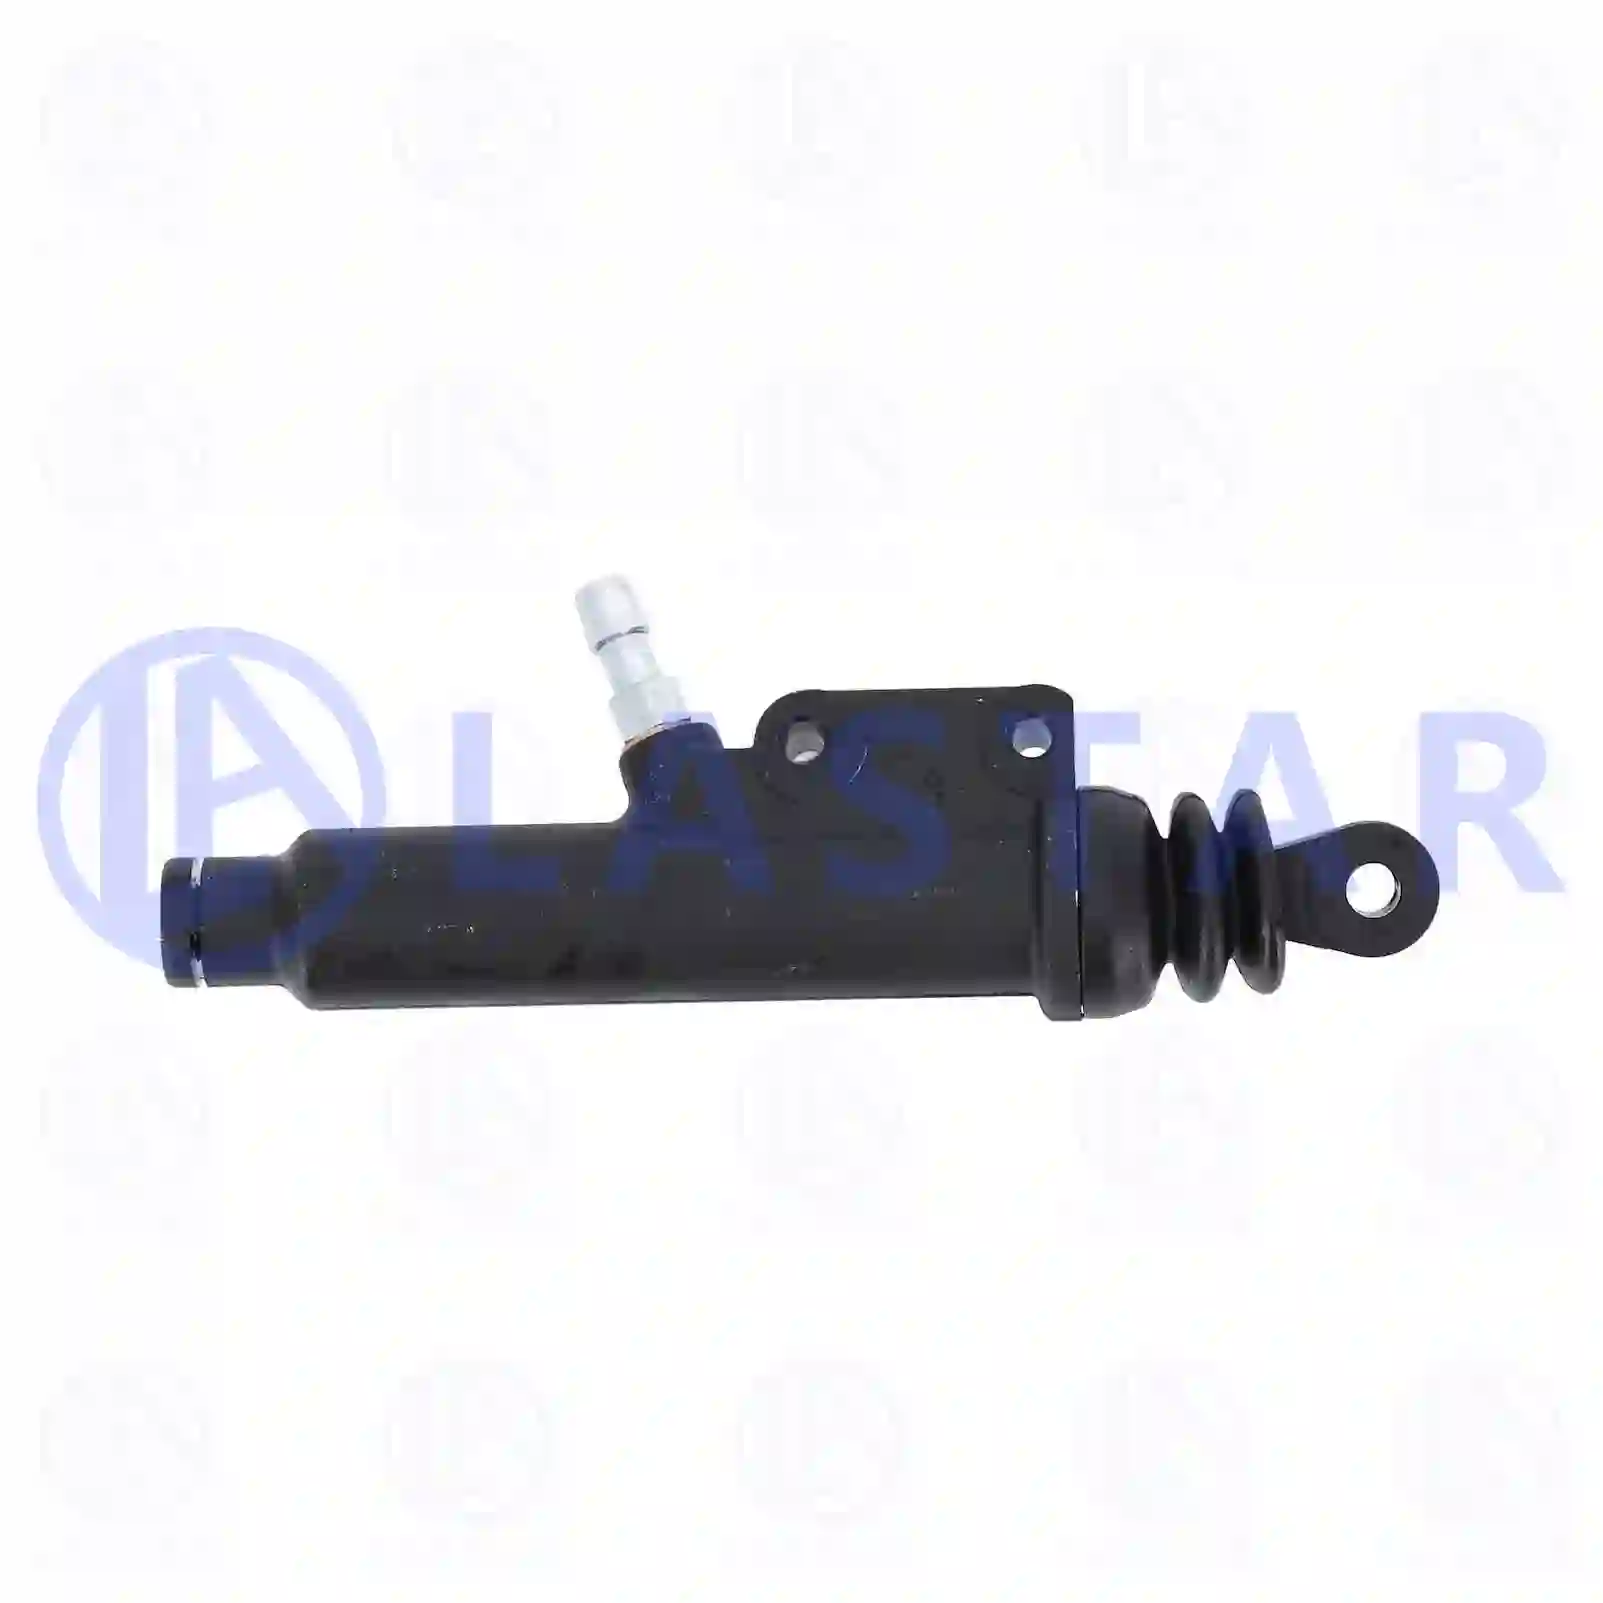 Clutch cylinder, 77722507, 0002903212, 2D0721401 ||  77722507 Lastar Spare Part | Truck Spare Parts, Auotomotive Spare Parts Clutch cylinder, 77722507, 0002903212, 2D0721401 ||  77722507 Lastar Spare Part | Truck Spare Parts, Auotomotive Spare Parts